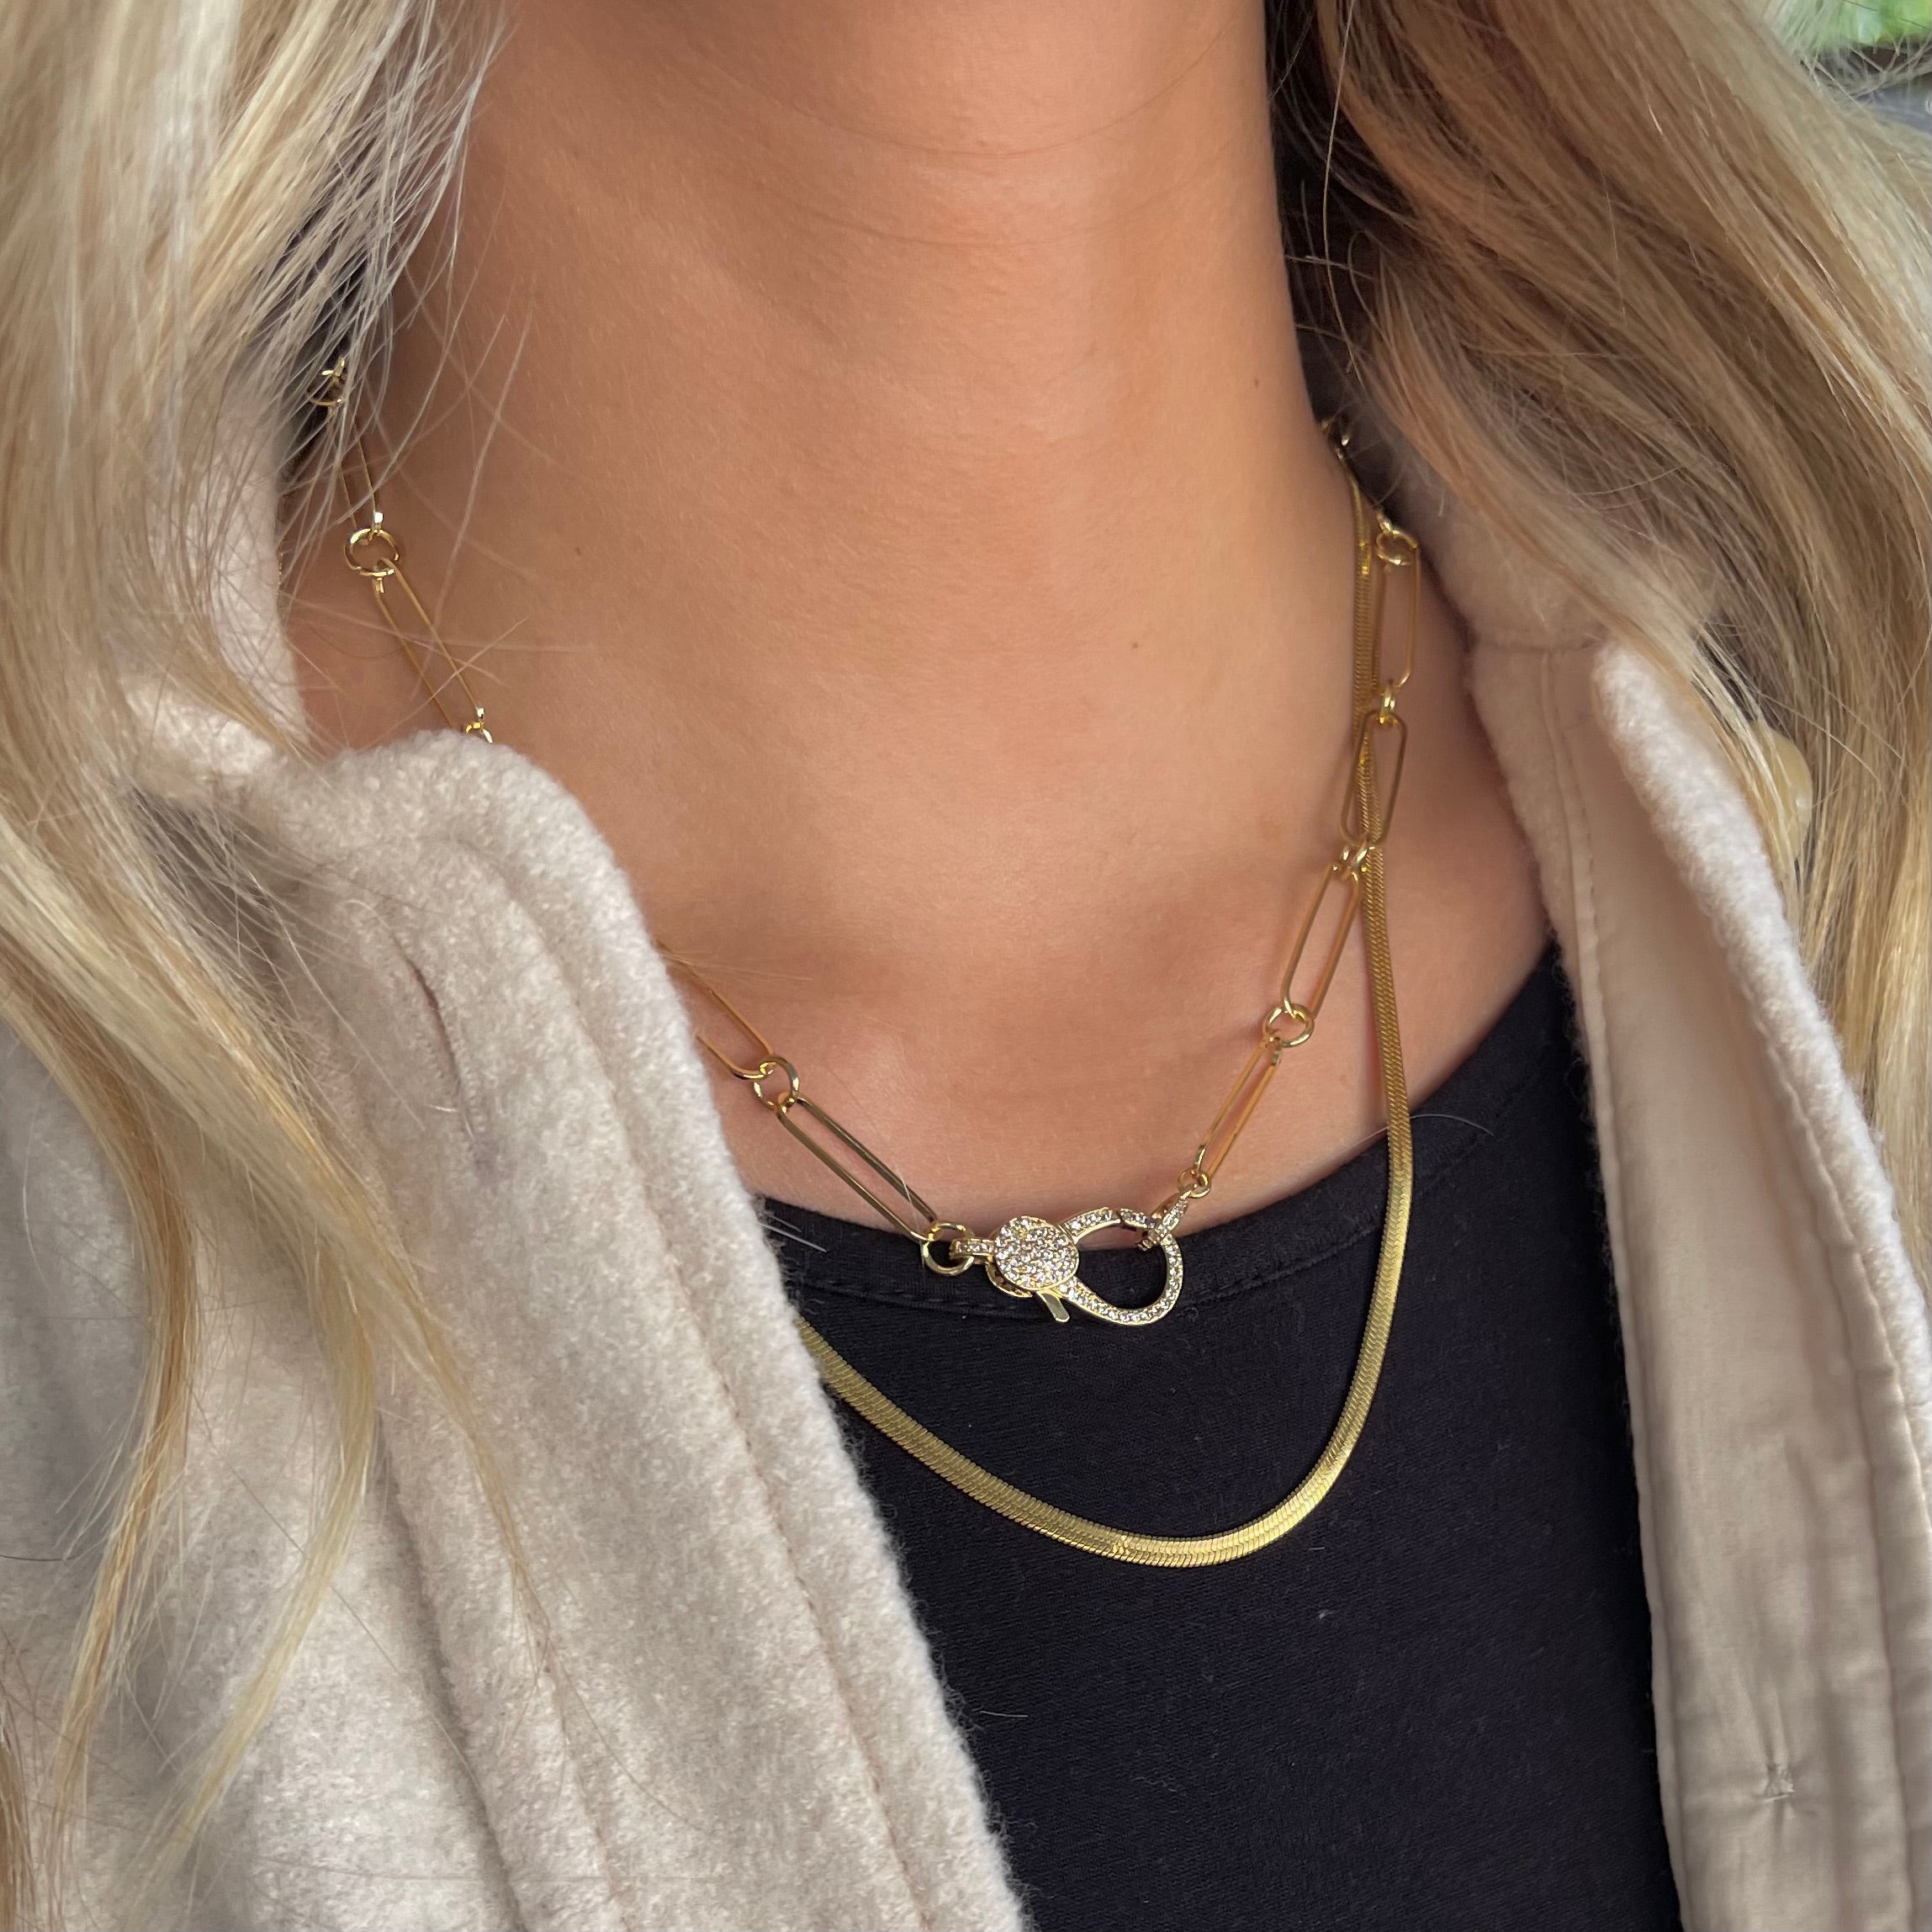 Ann Layering Gold Necklaces Herringbone Gold Necklace (3rd Necklace)